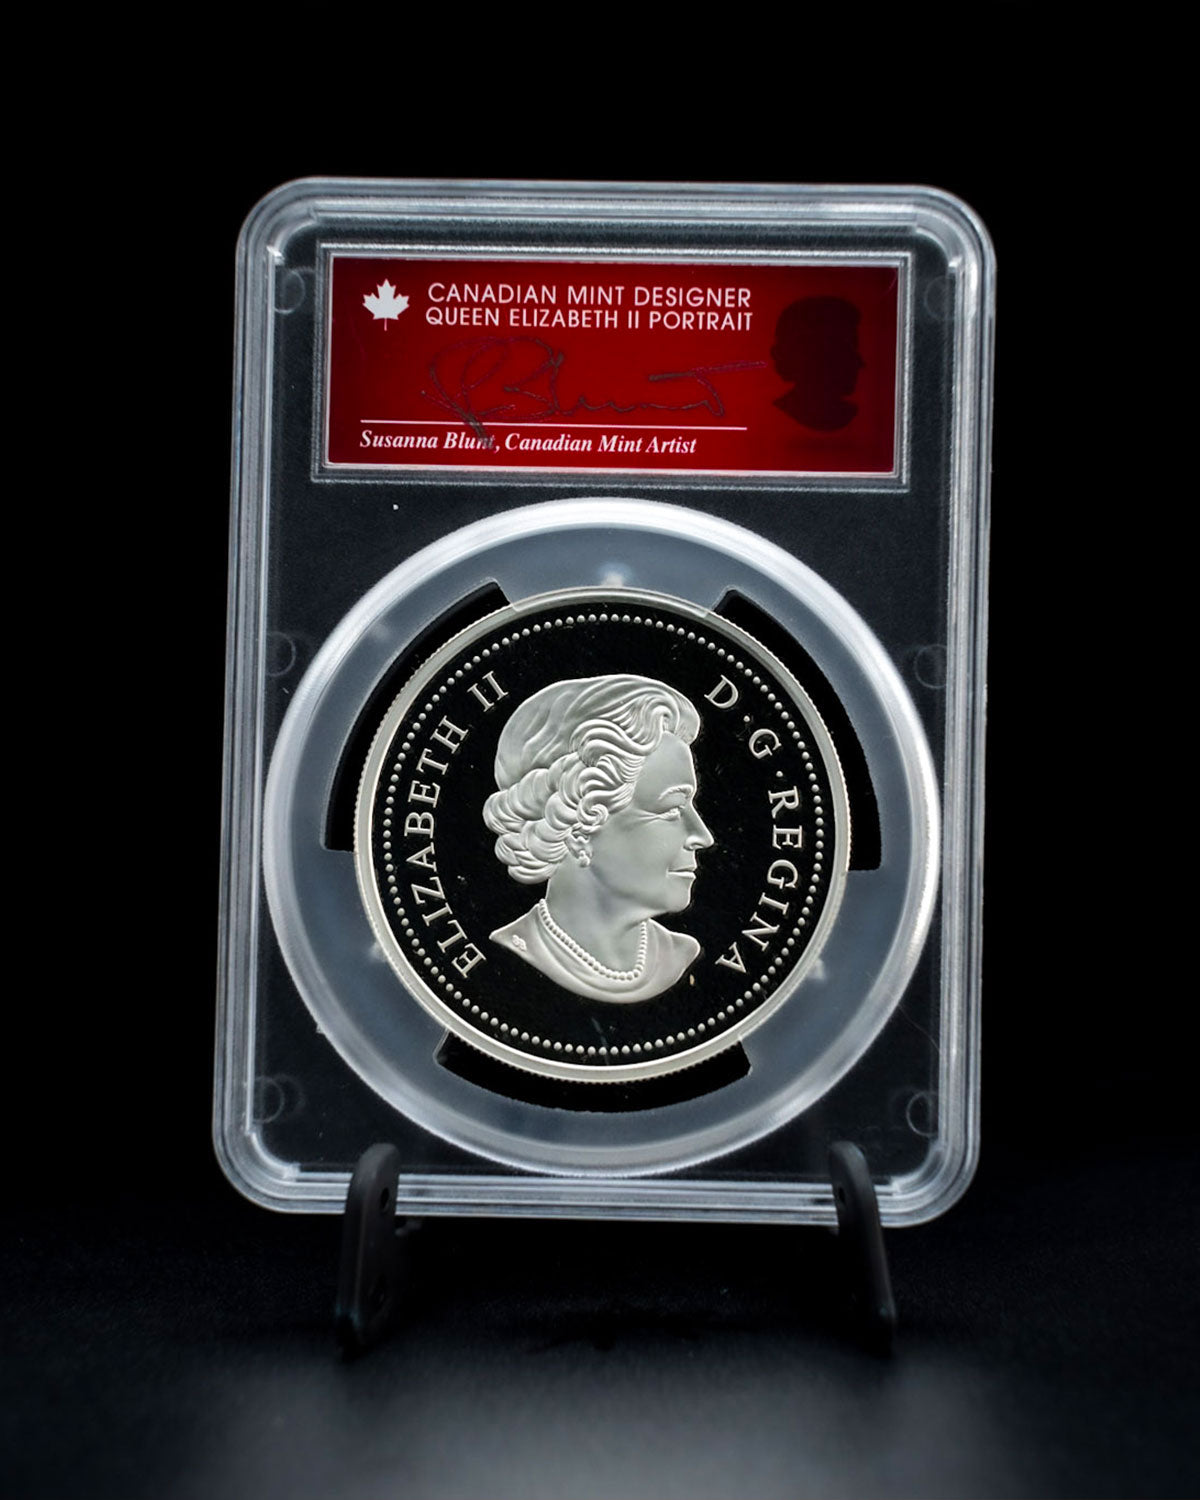 2022 5oz 1C Canada Last Penny 10th Anniversary | First Day of Issue | Susanna Blunt Autographed